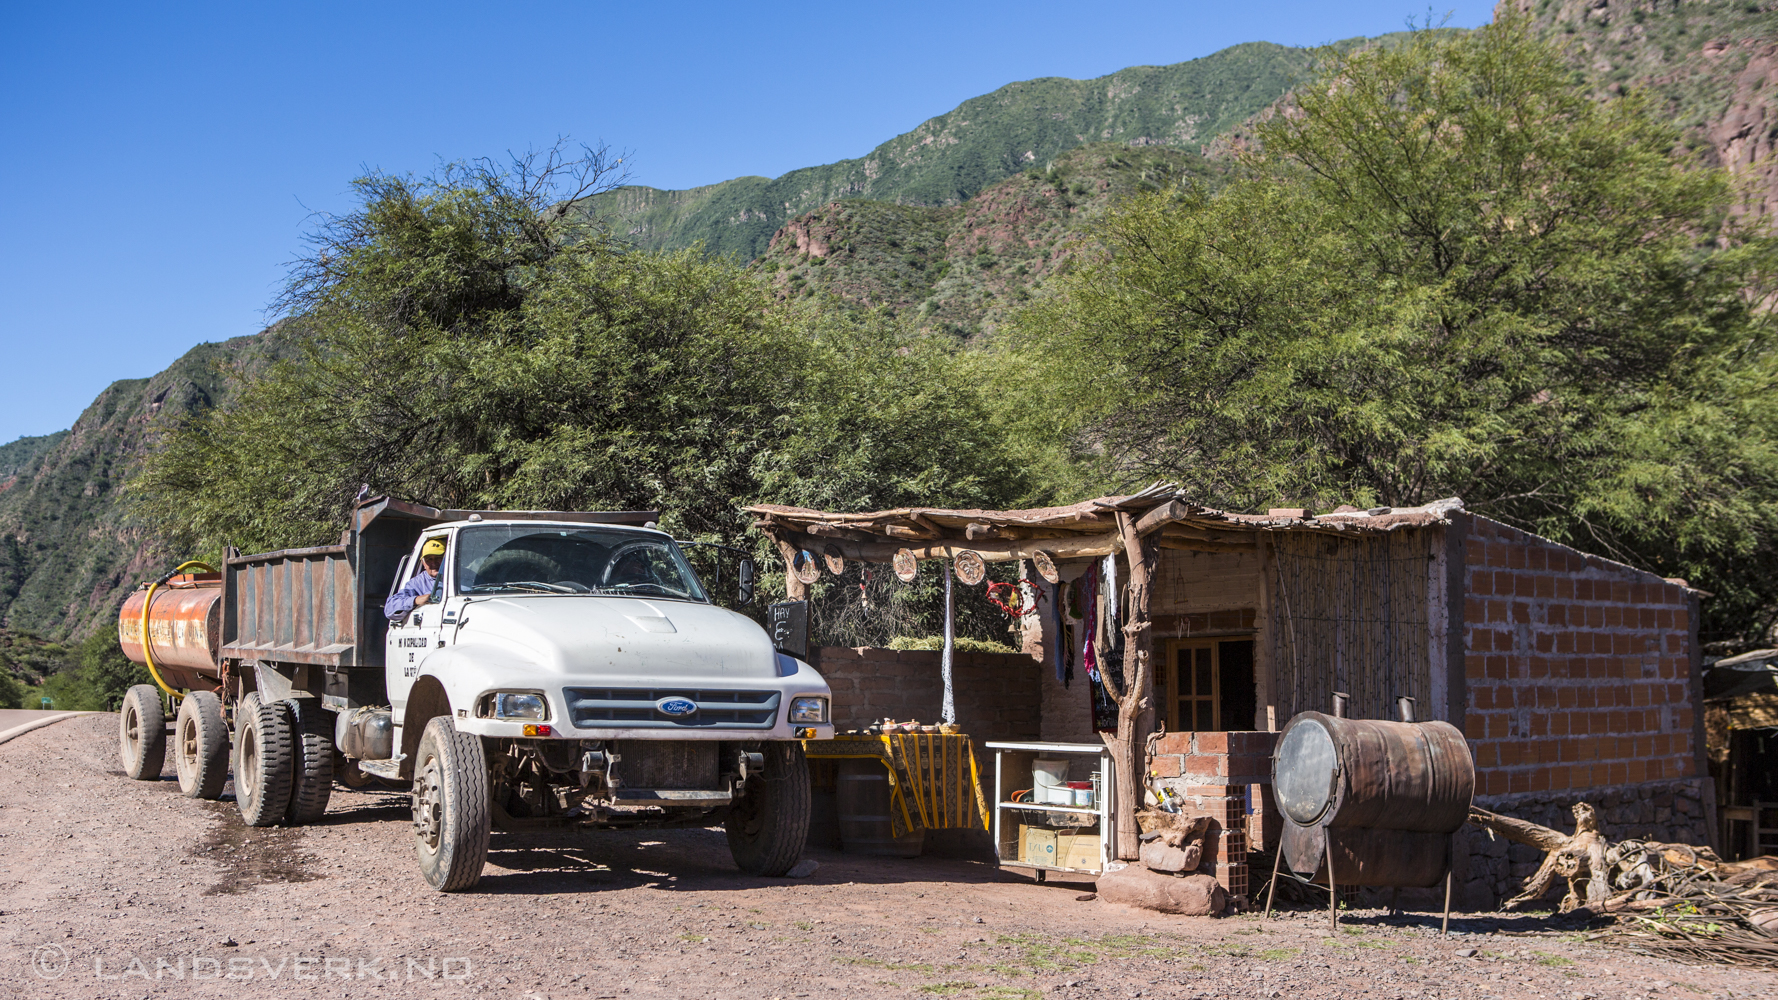 On the road to Cafayete, Salta, Argentina. 

(Canon EOS 5D Mark III / Canon EF 24-70mm f/2.8 L USM)